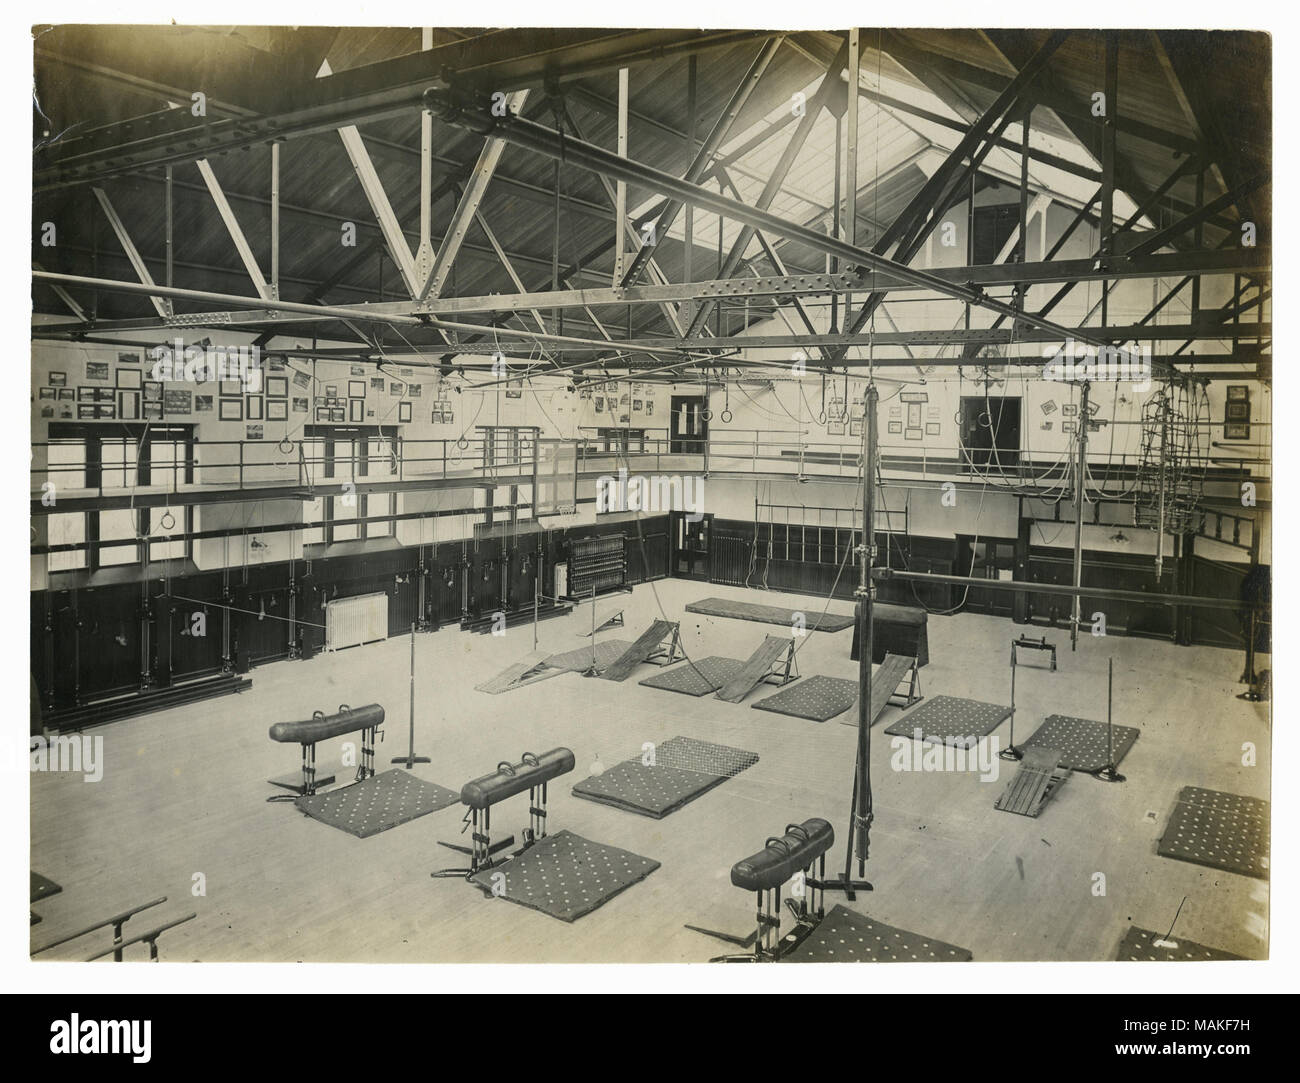 Horizontal photograph of a large interior space for a gym which includes a lot of gymnastic equipment such as pommel horses and rings as well as nets. There is a running rack around the top half of the gym. Title: 'A.G. Spalding and Bros. exhibit of a model gymnasium. Looking east from the running Track, showing a new model and latest improved horizontal bar.'  . 1904. Stock Photo